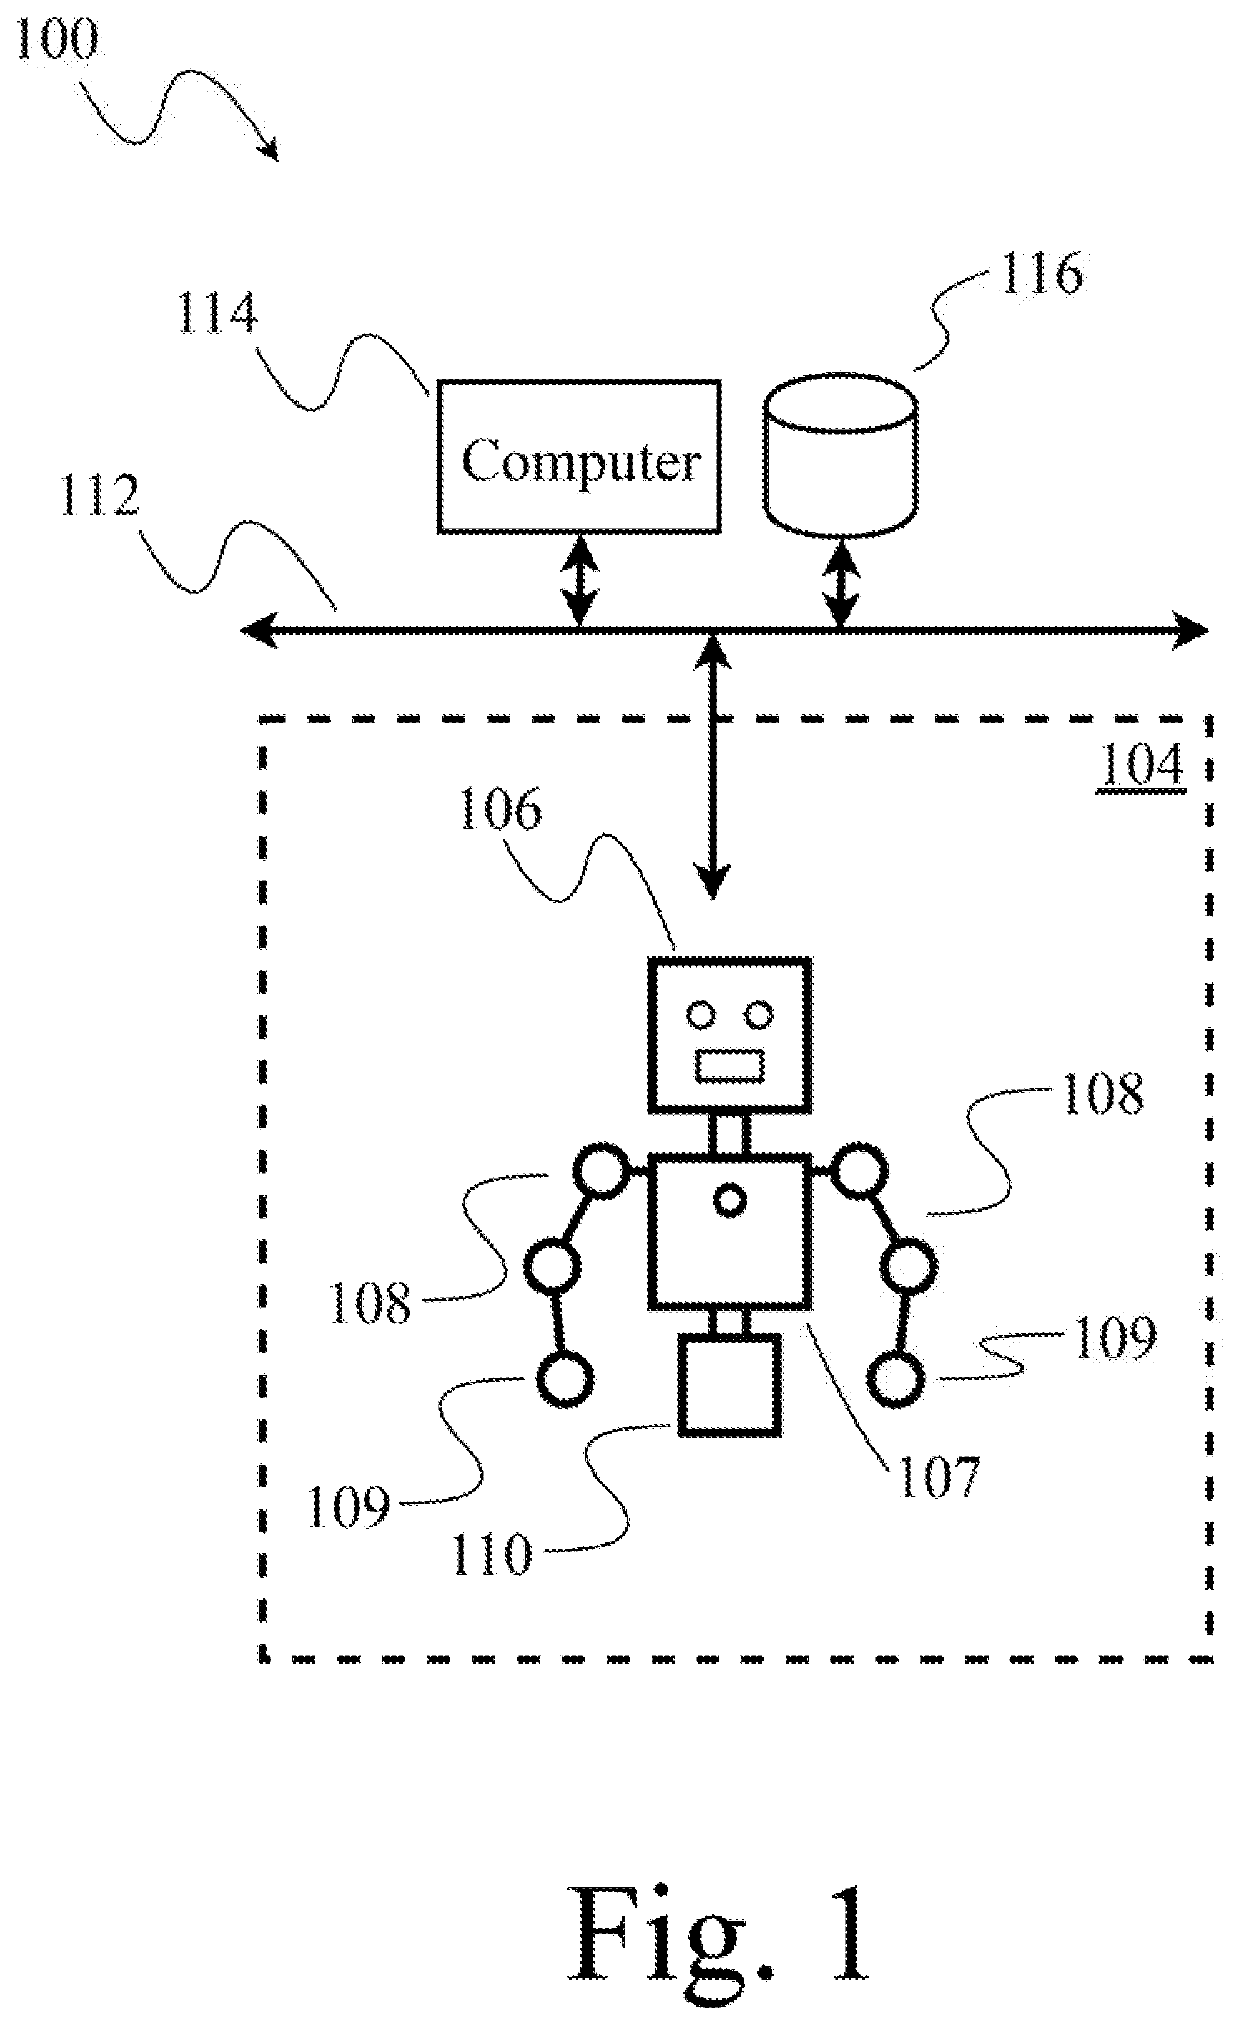 Machine vision parsing of three-dimensional environments employing neural networks